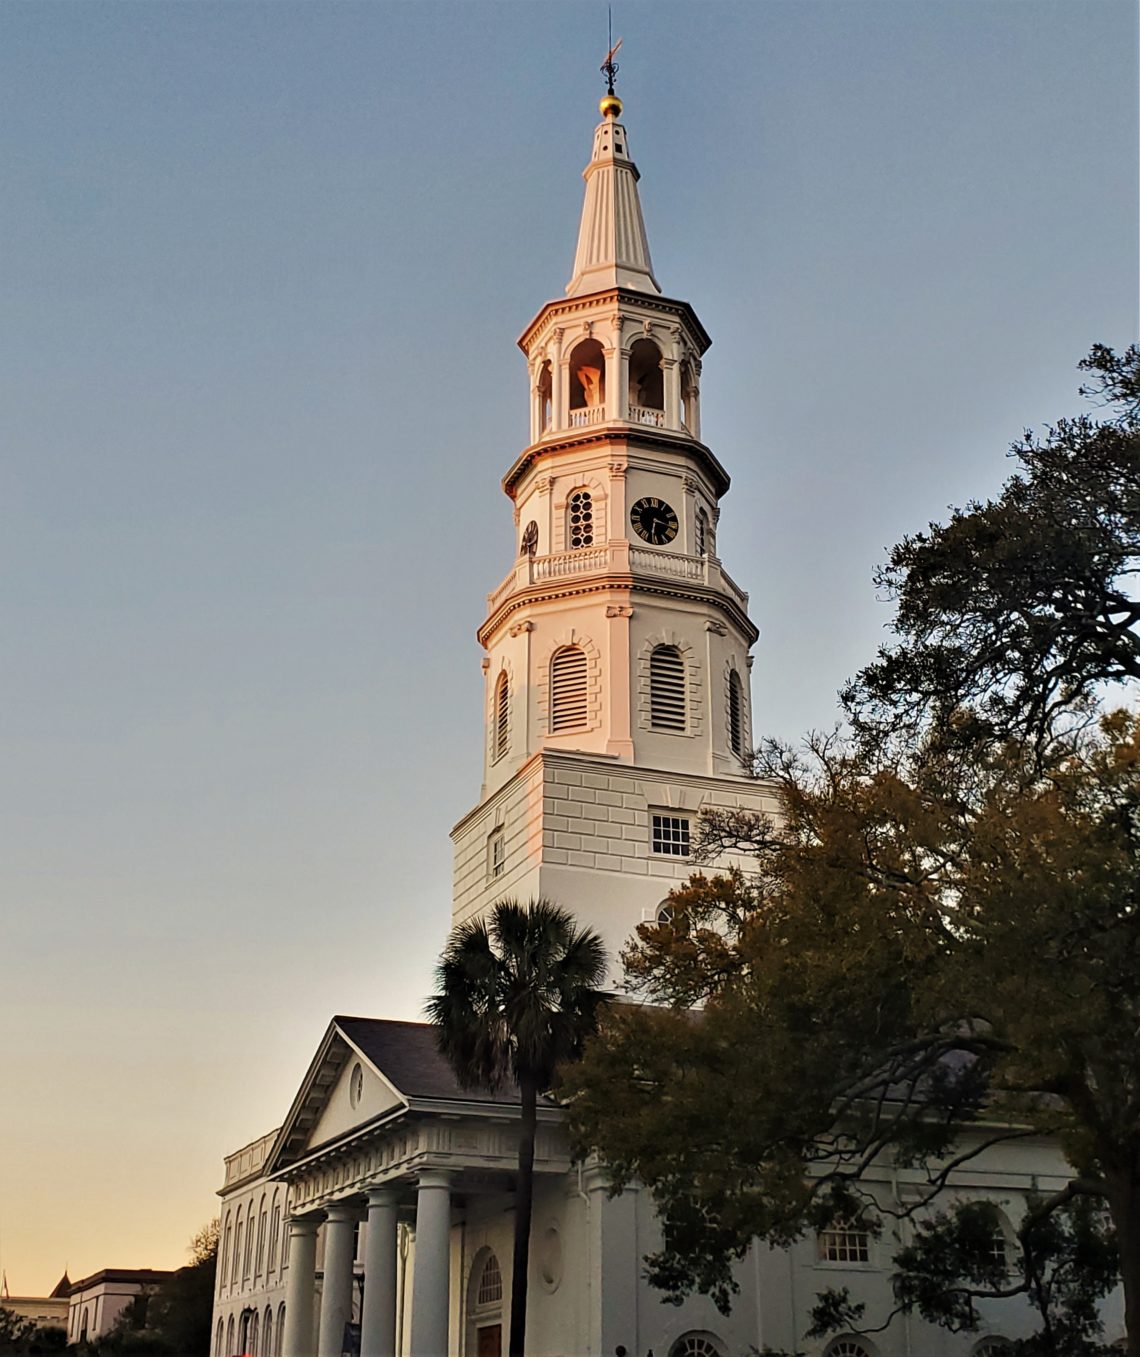 St. Michael's steeple being bathed in the light of the setting sun. The iconic white steeple wasn't always that way. During the Revolutionary and Civil Wars it was painted black, to make it a tougher target during the bombardment of the city.